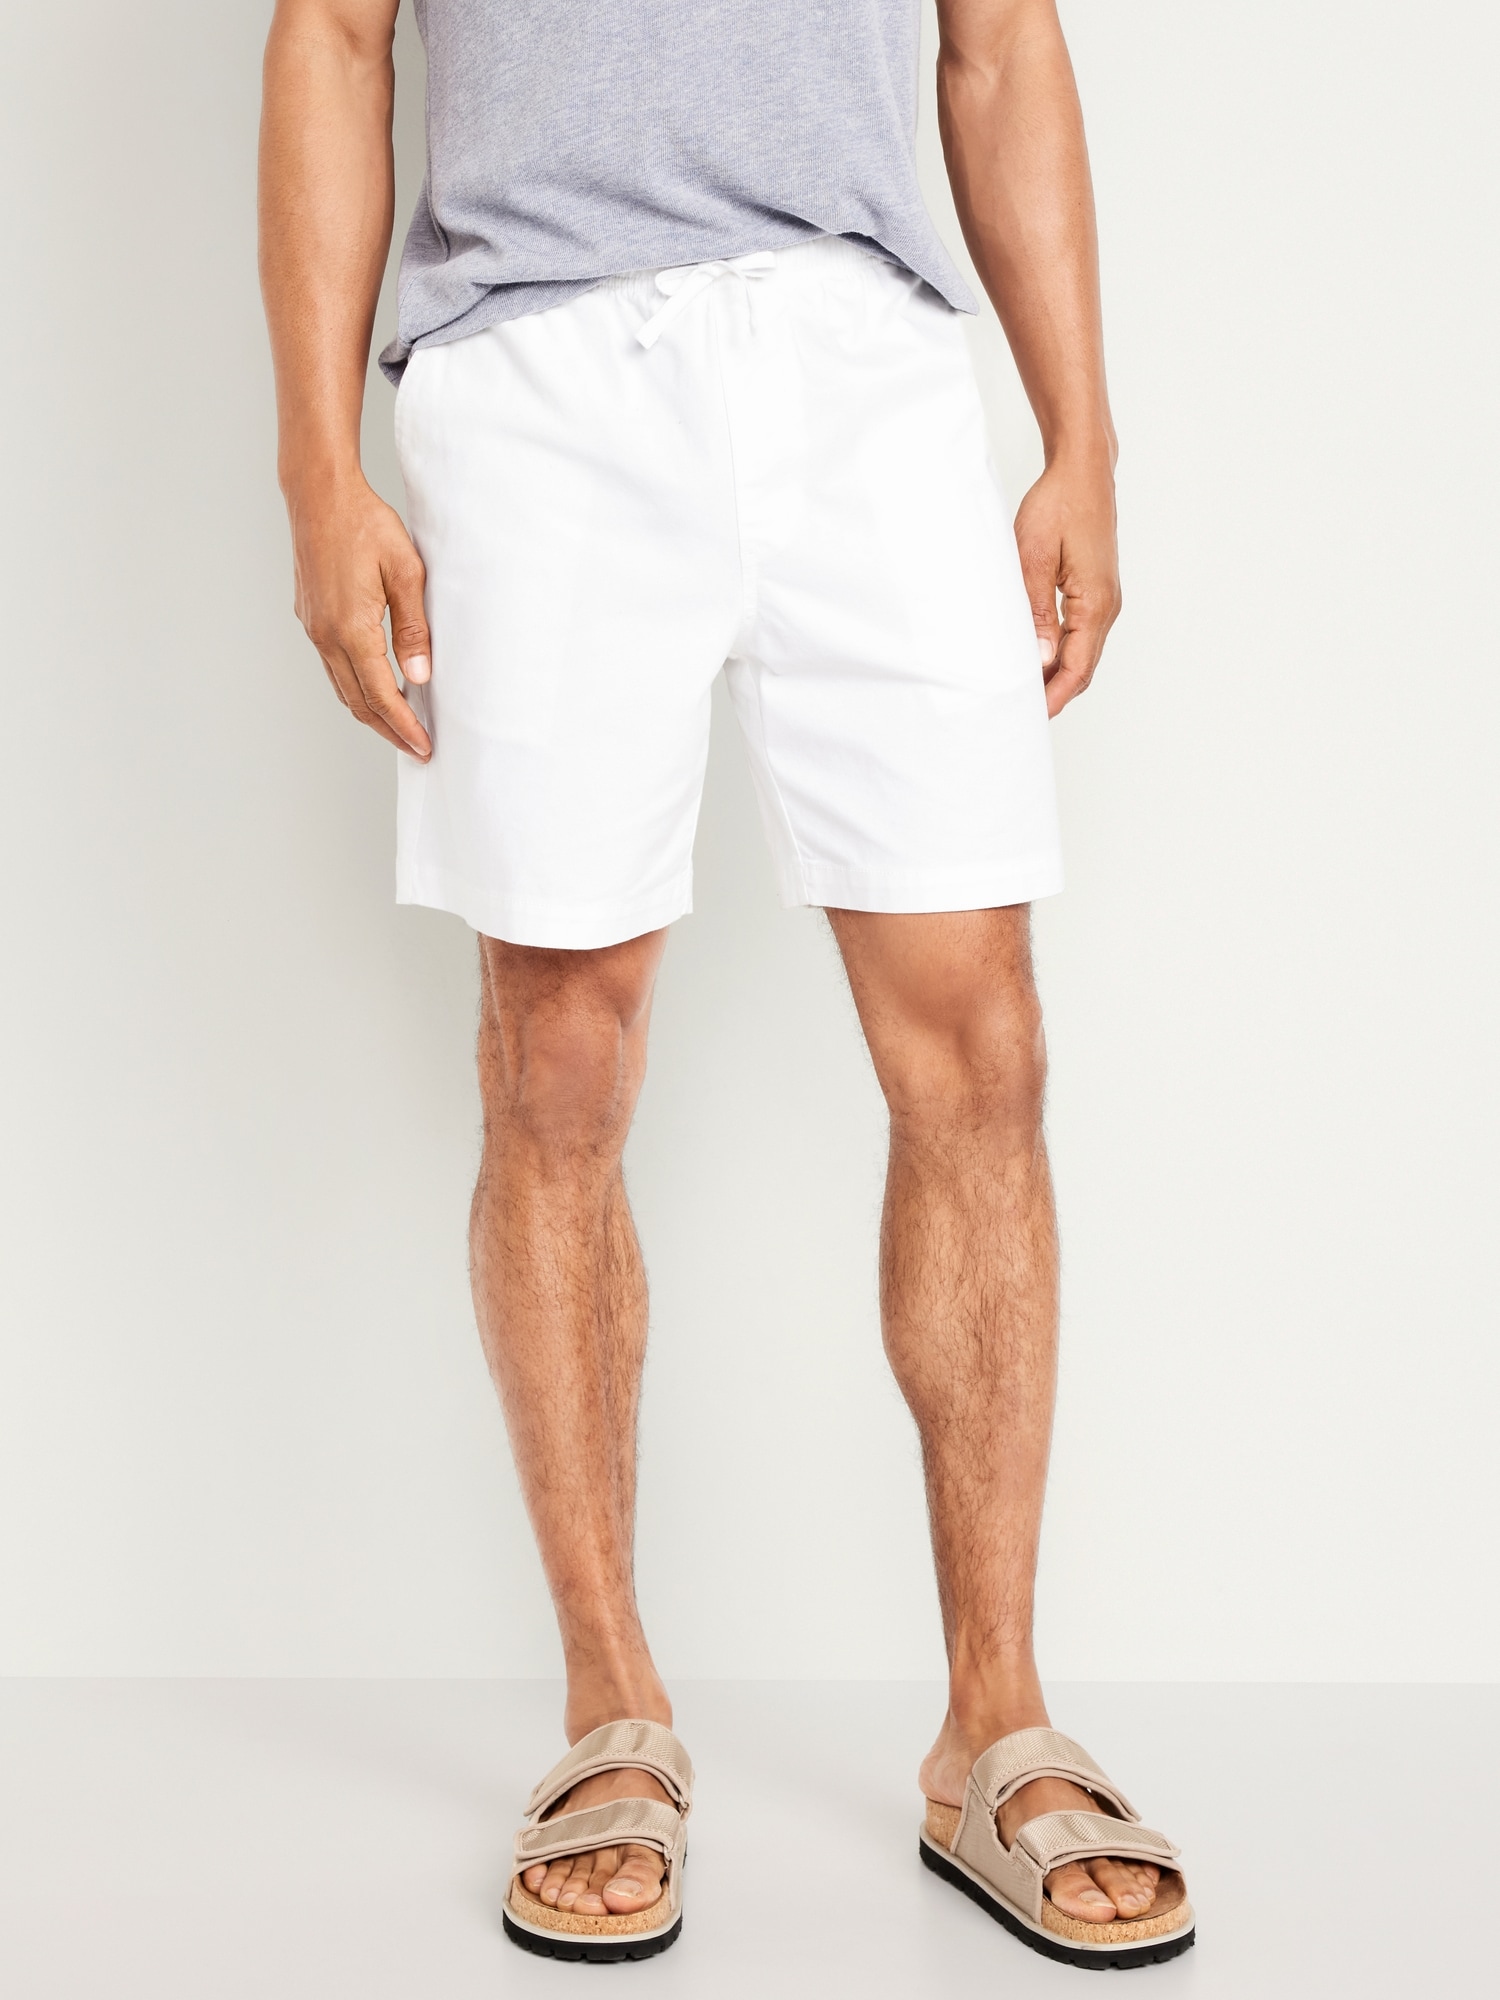 Pull-On Twill Jogger Shorts -- 7-inch inseam Hot Deal